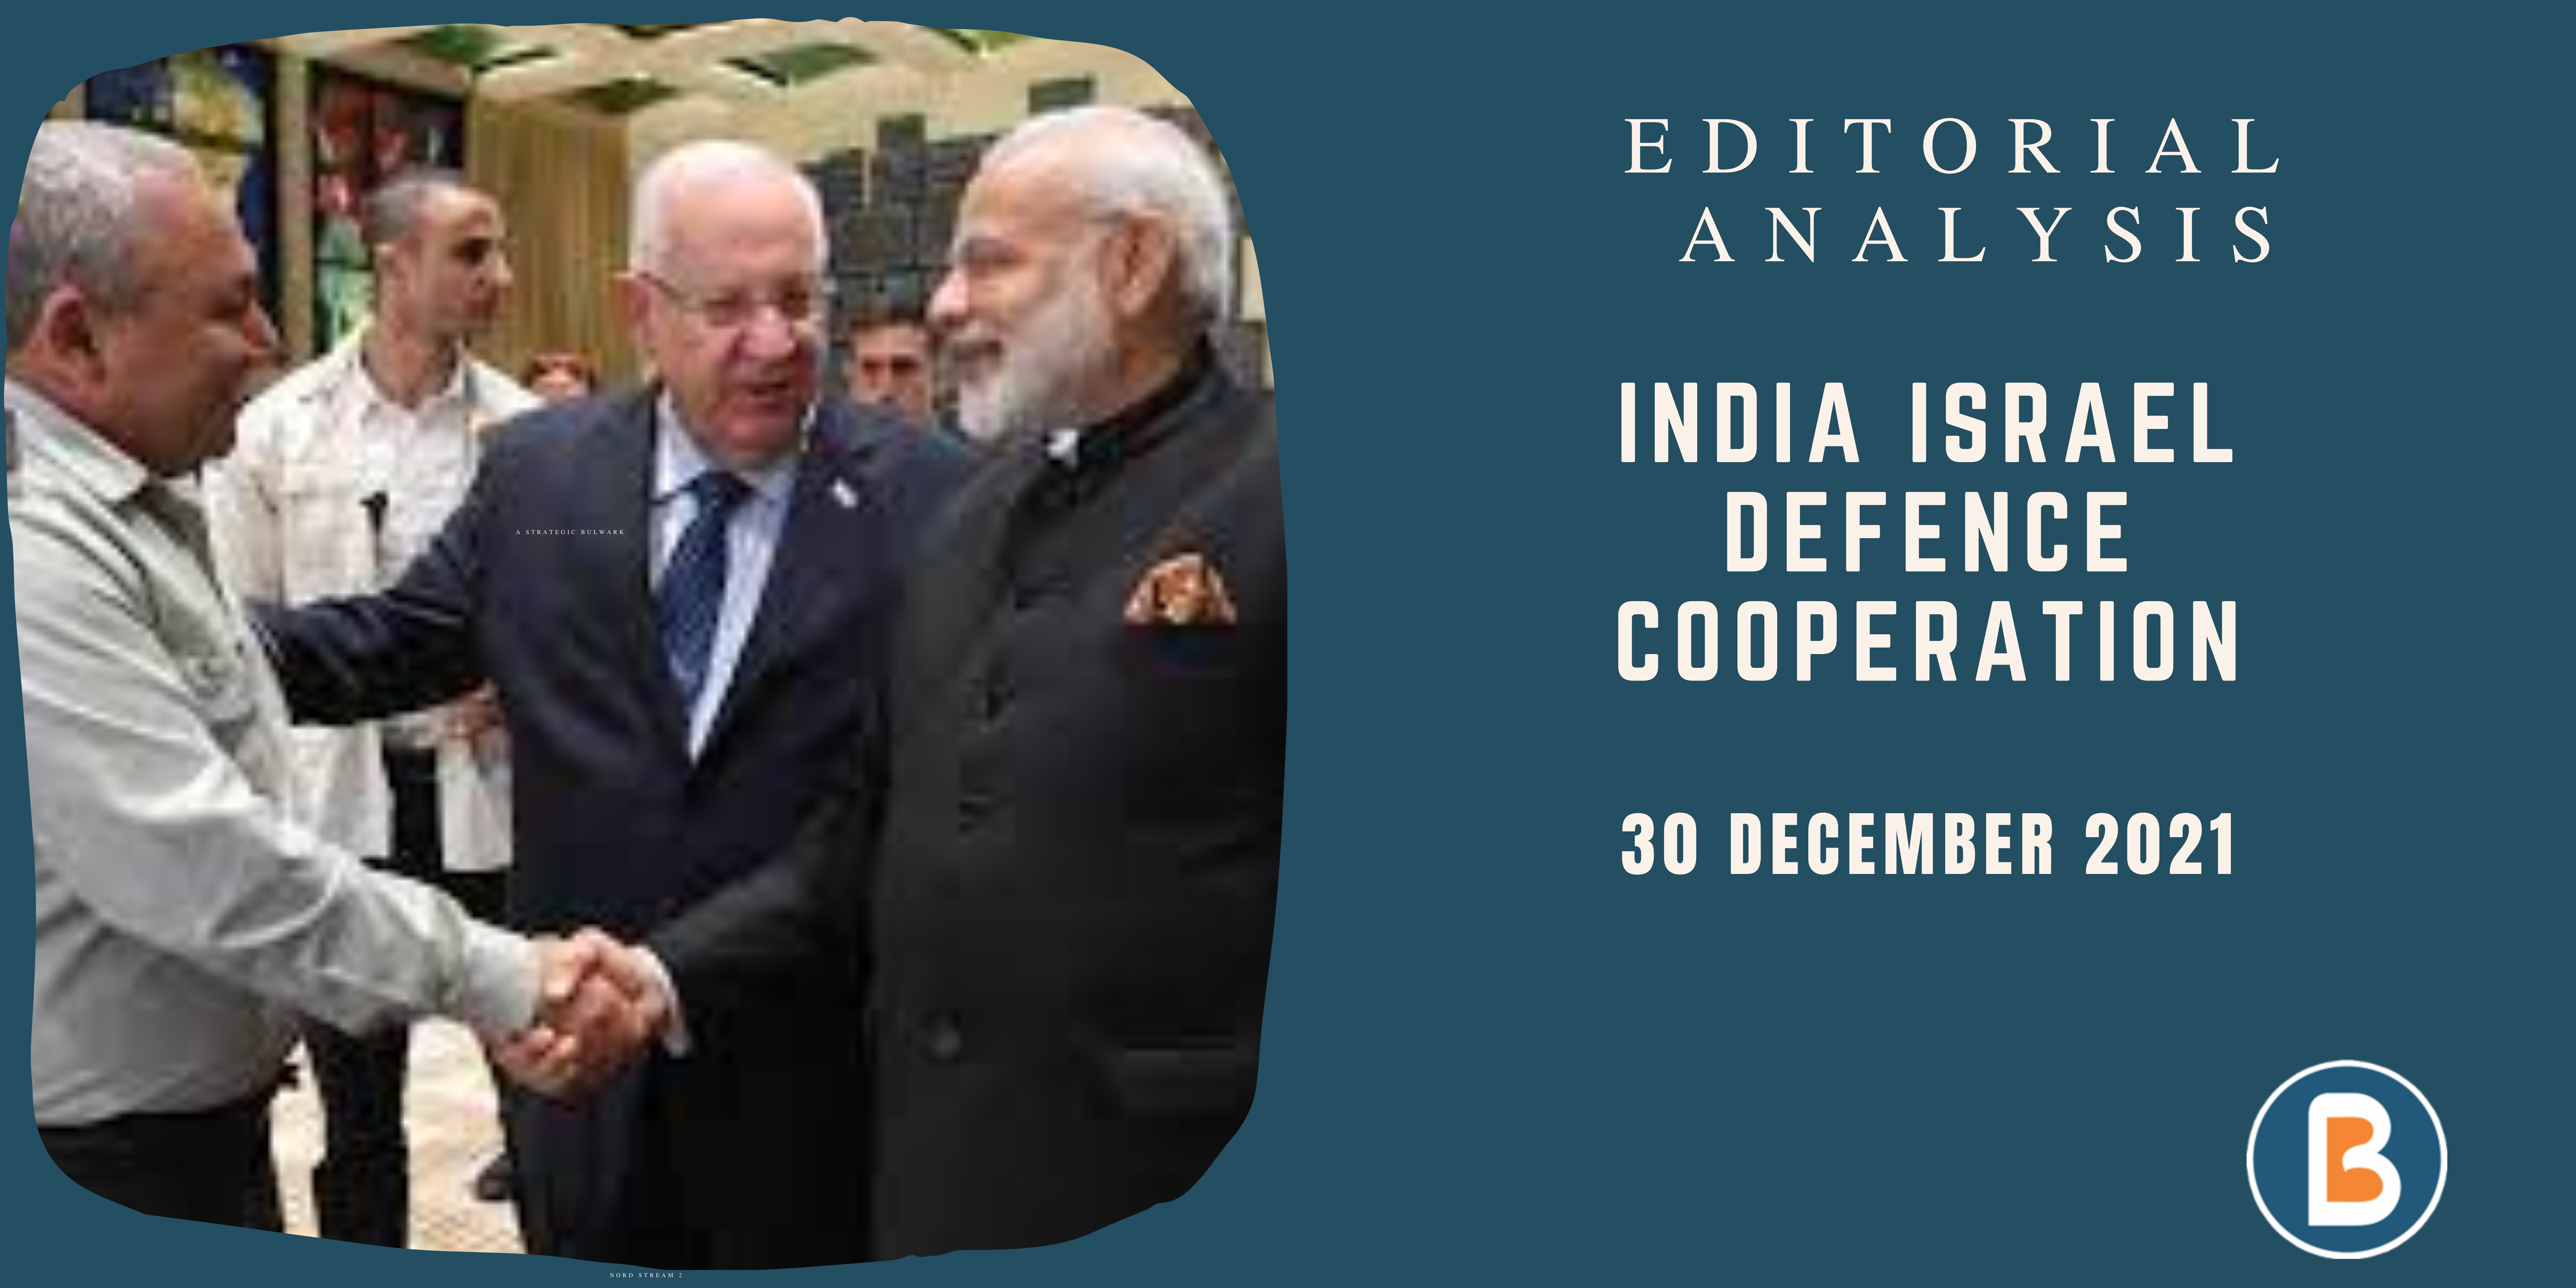 Editorial Analysis for IAS - INDIA ISRAEL DEFENCE COOPERATION